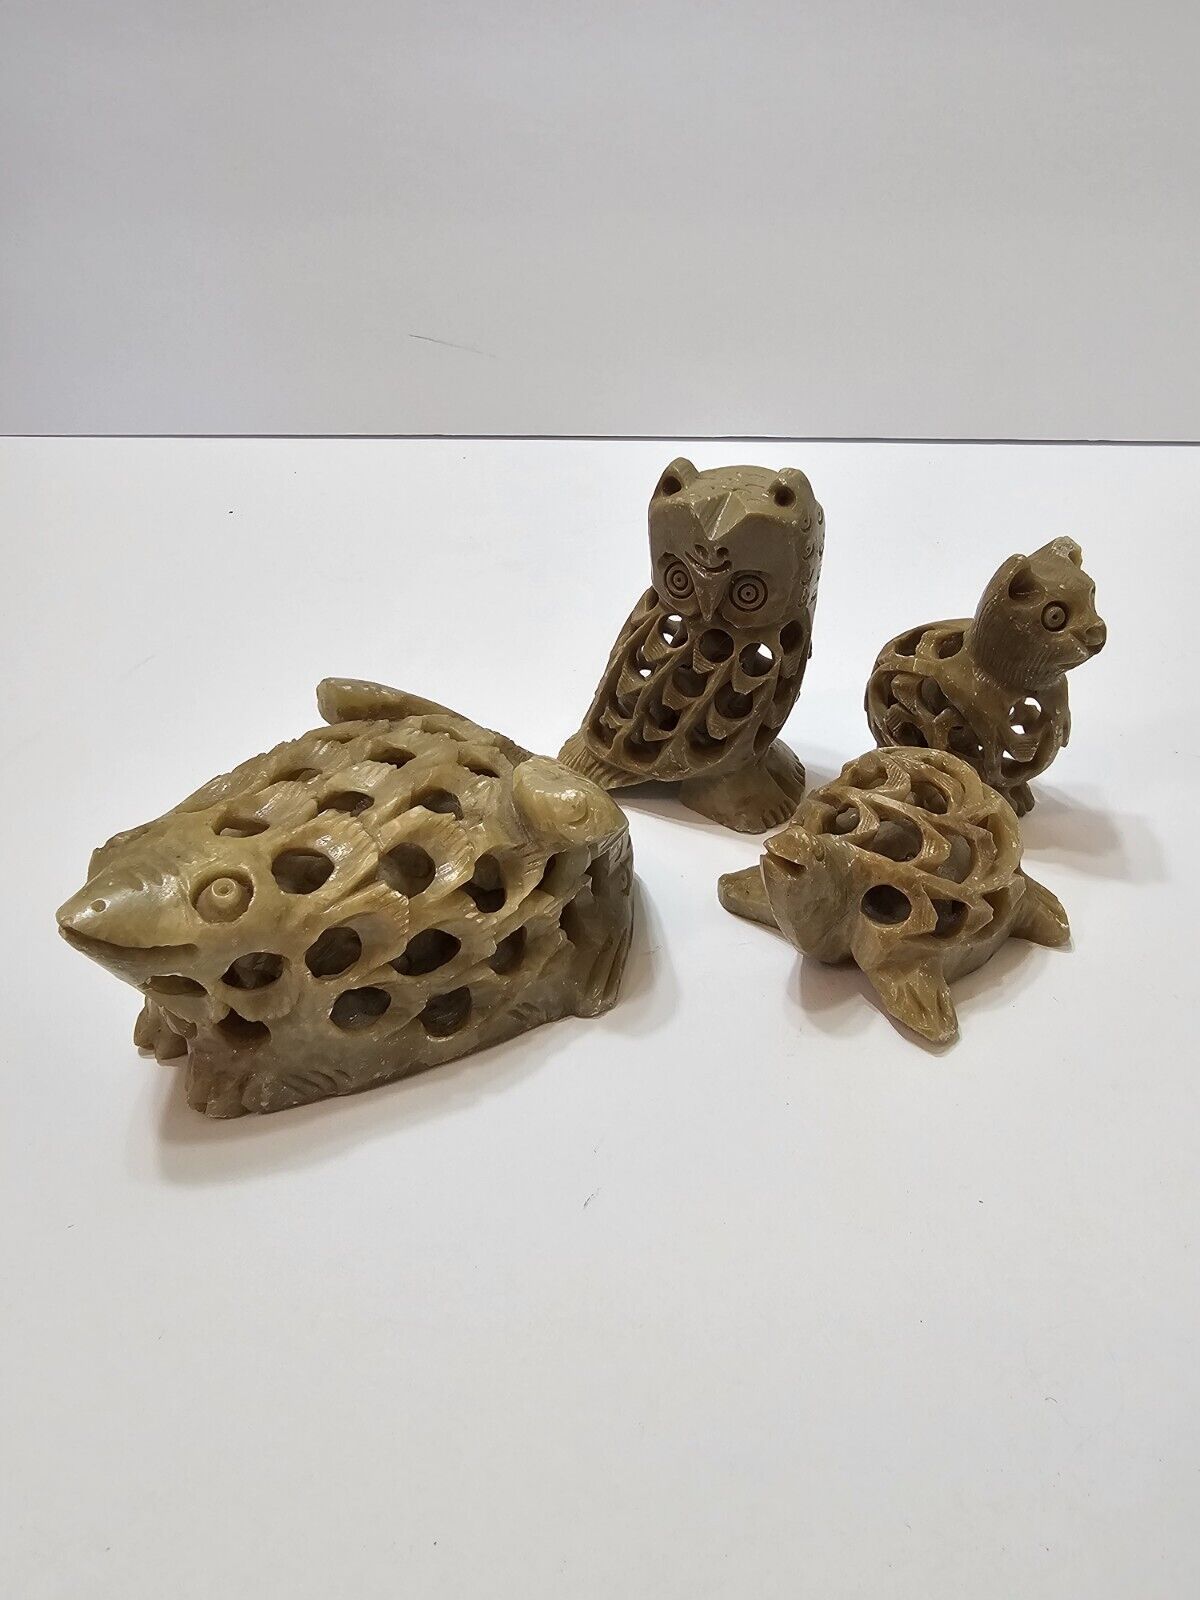 Carved Soapstone Animals With Babies Inside Lot Of 4 Made In India, Cute